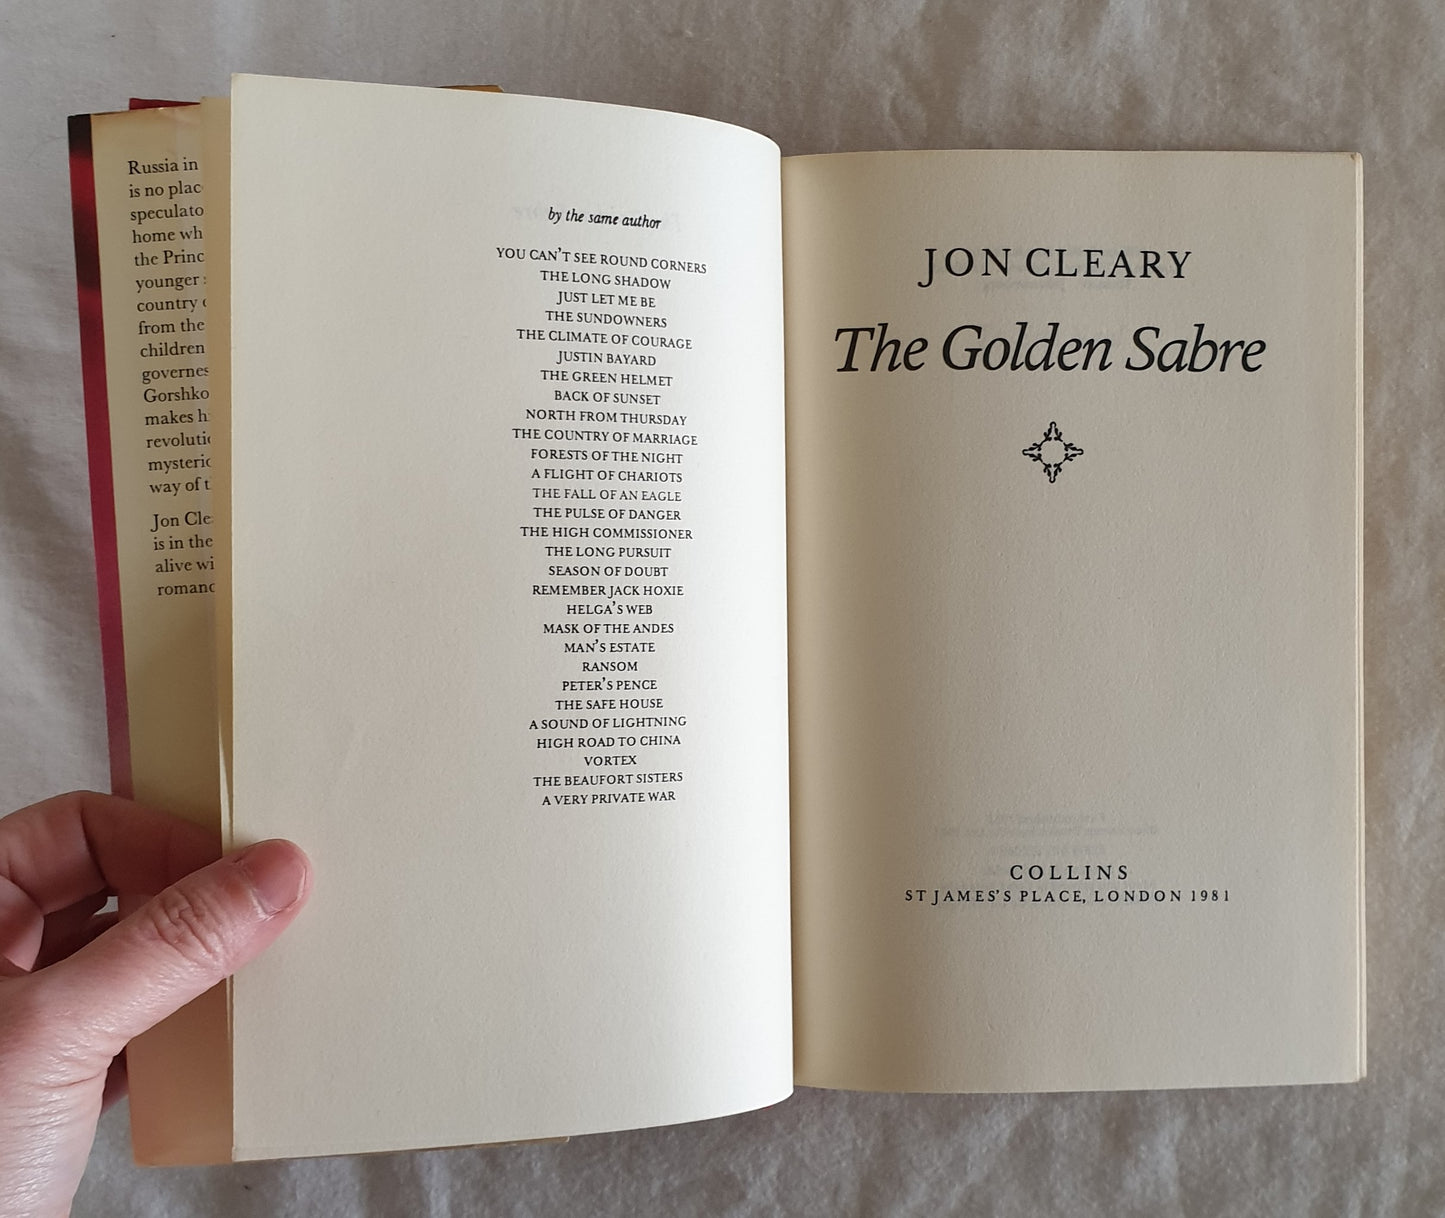 The Golden Sabre by Jon Cleary